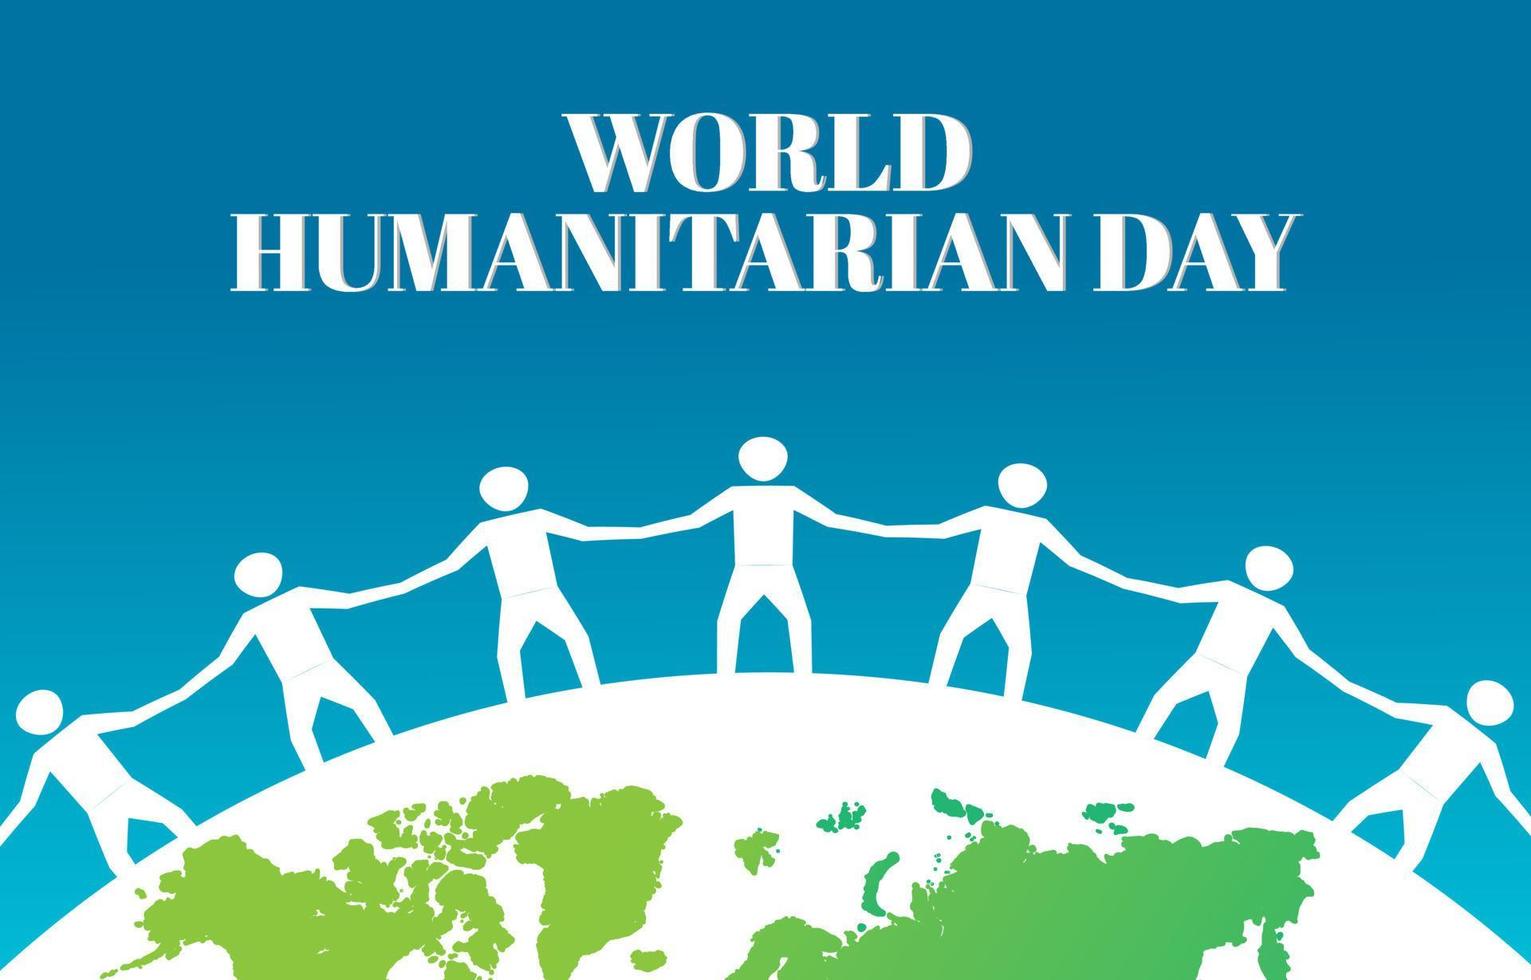 Flat Design Illustration Of World Humanitarian Day Template, Design Suitable For Posters, Backgrounds, Greeting Cards, World Humanitarian Day Themed vector